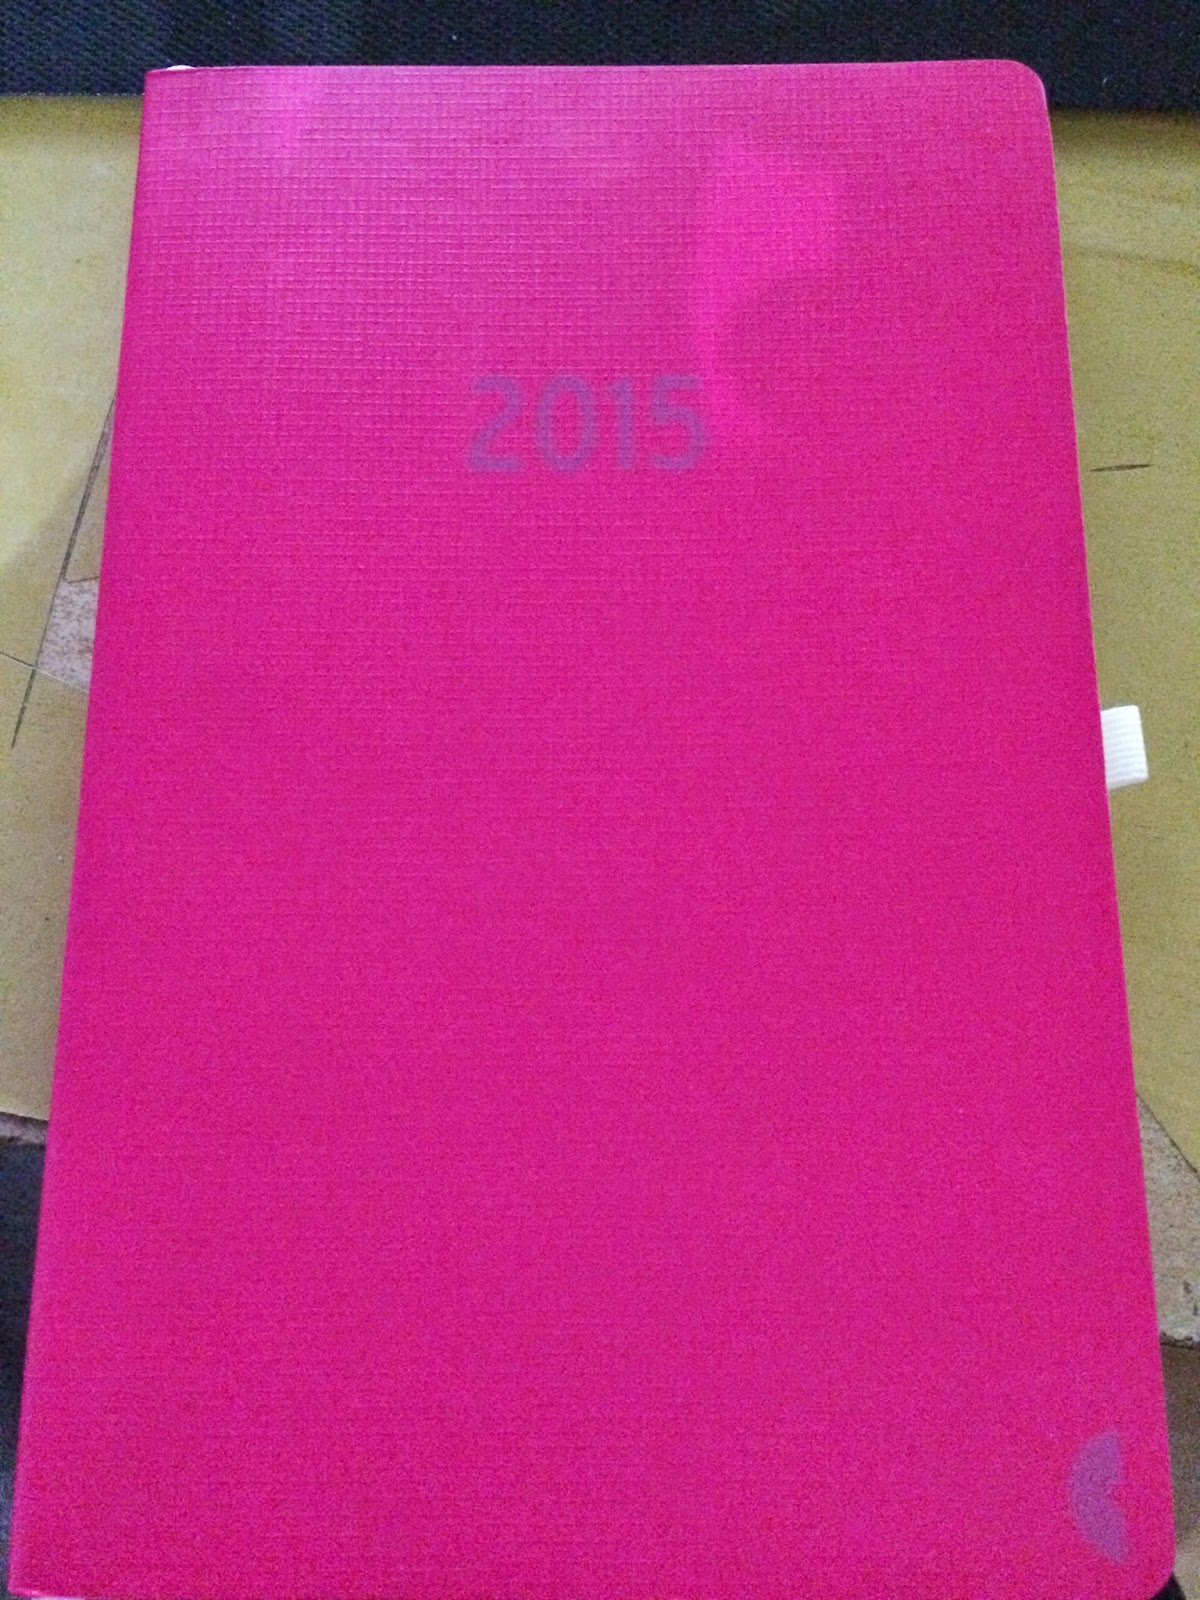 *Werbung* Produkttest Chronobook Colour Edition in Pink by Avery Zweckform 8